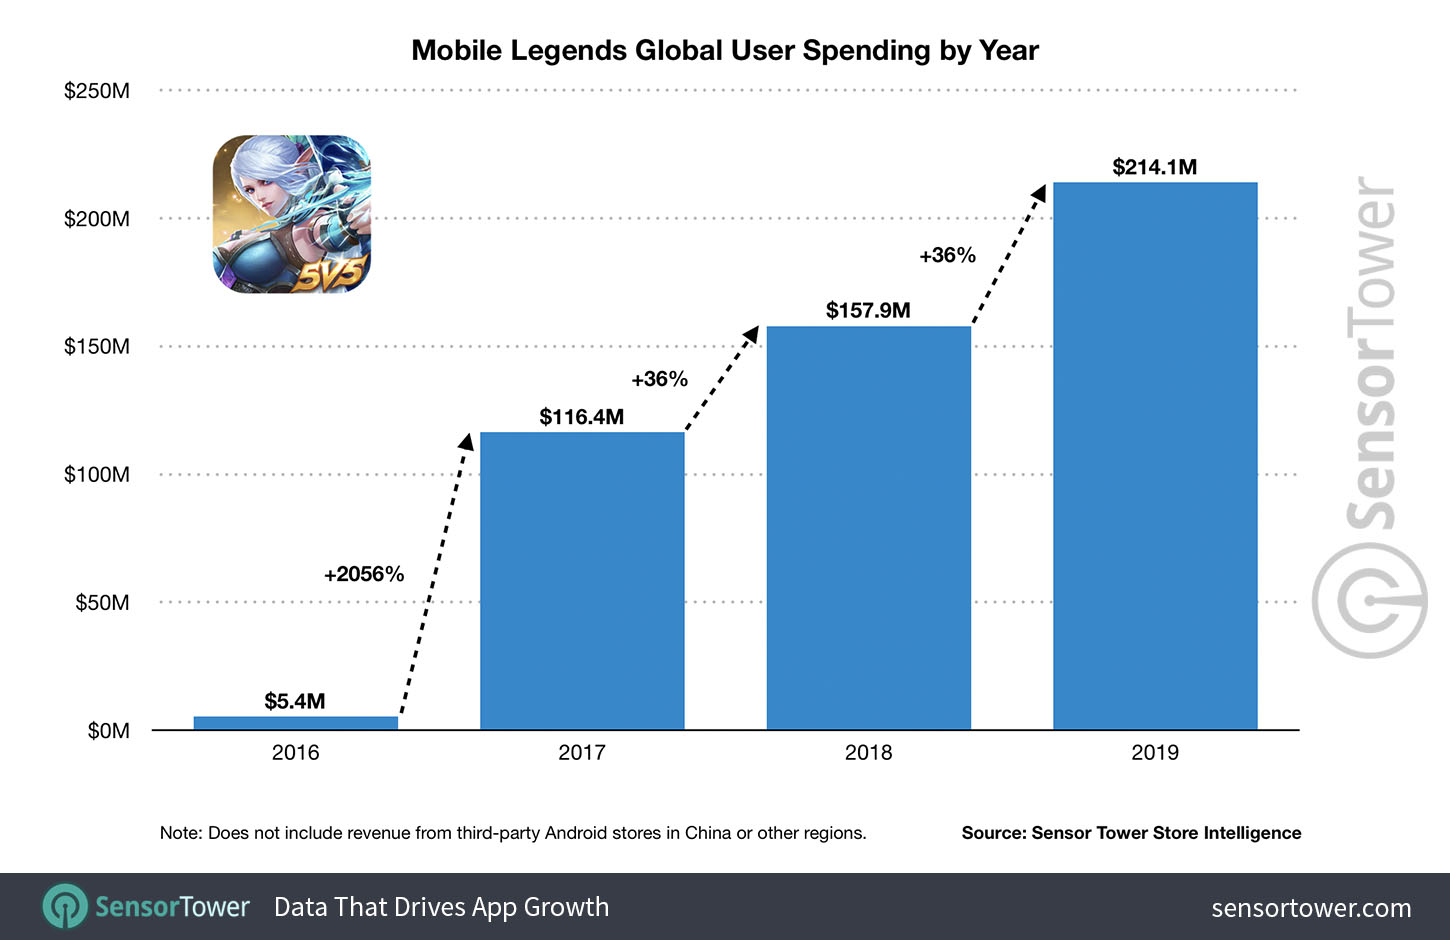 Mobile Legends yearly gross revenue from 2016 to 2019